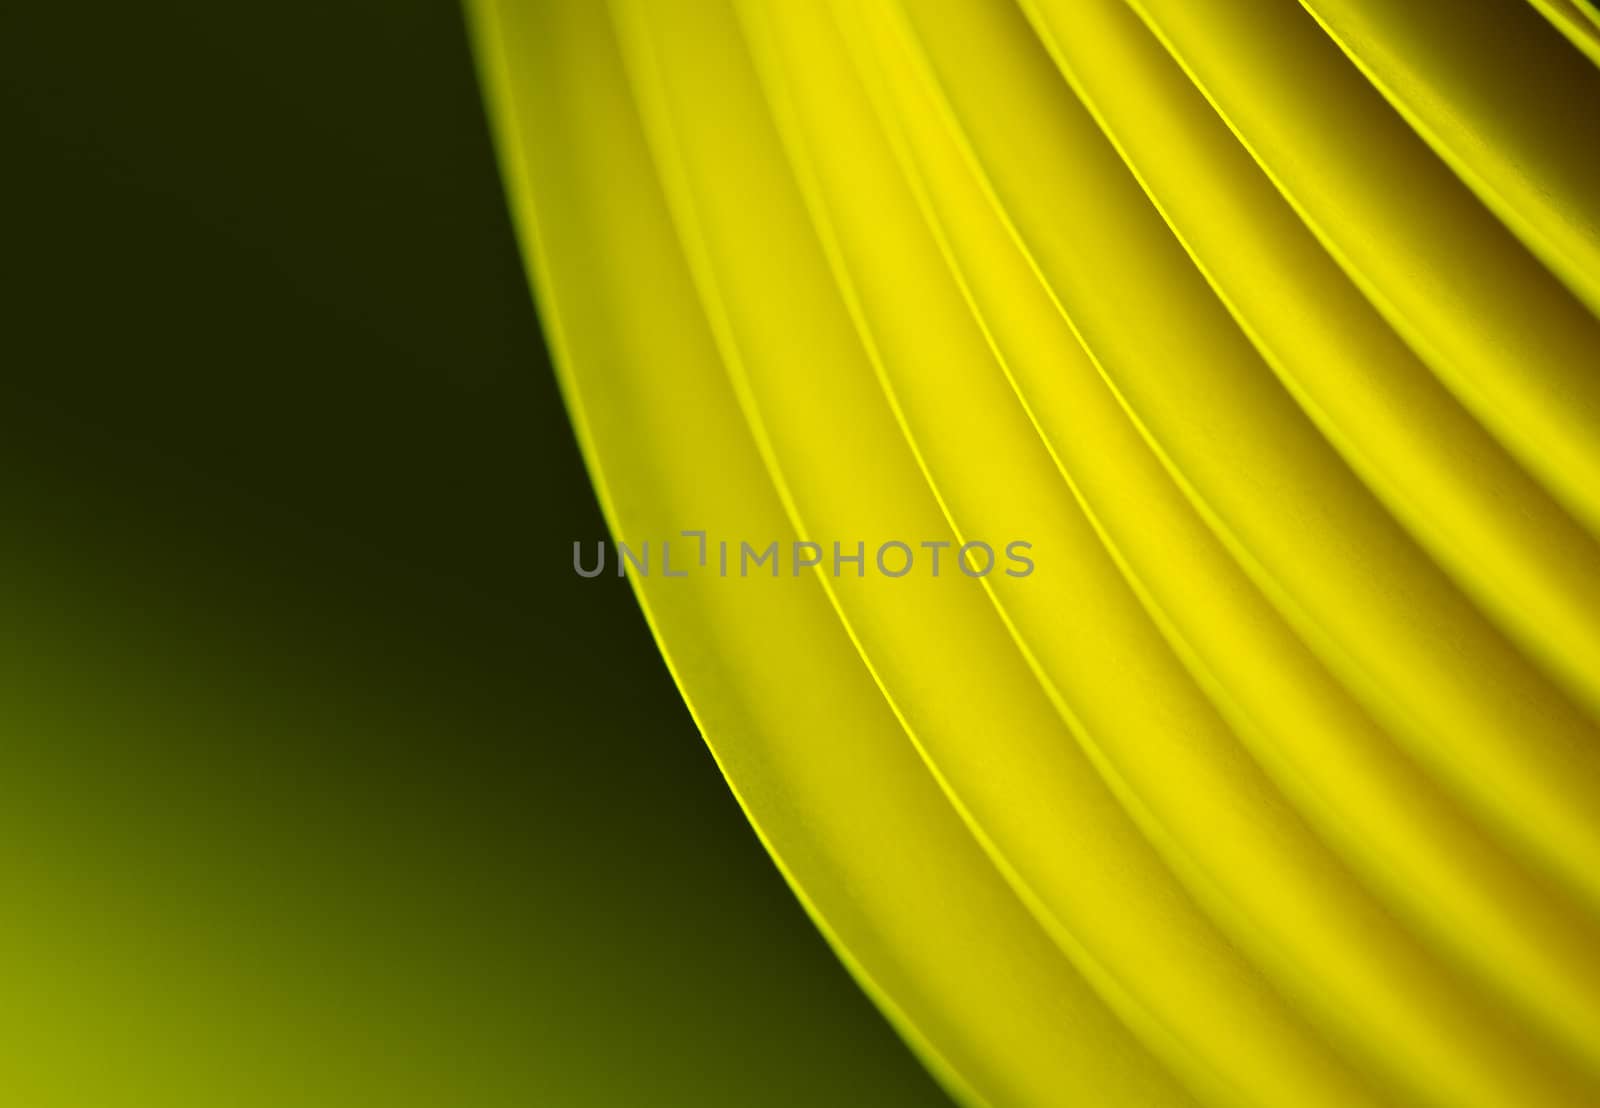 yellow A4 paper illuminated by LED lights showing greenish tint on the background